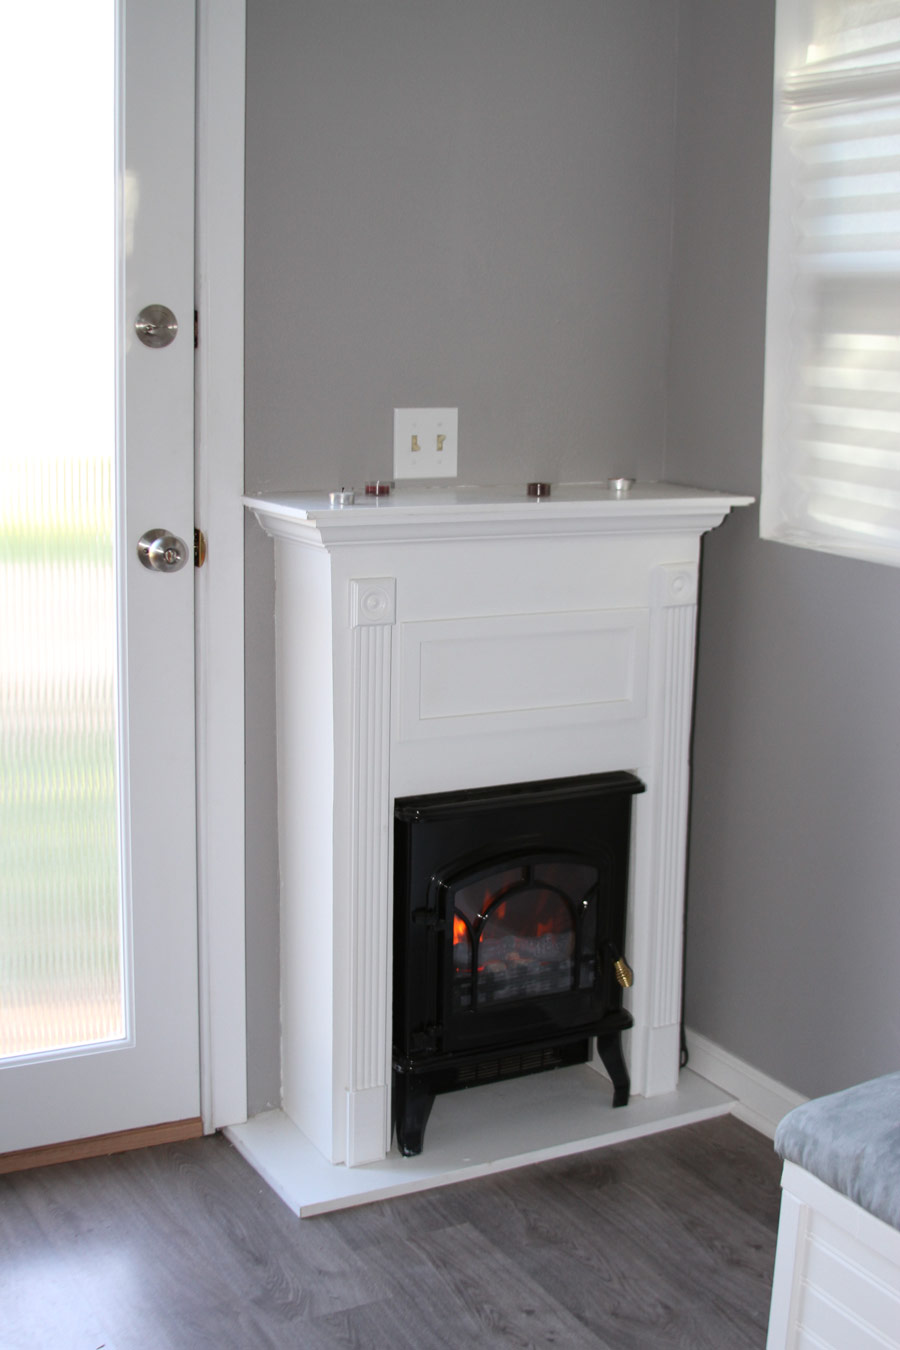 Amish Electric Fireplace New Pin by Linda Wallace On Decorating Country Cottage In